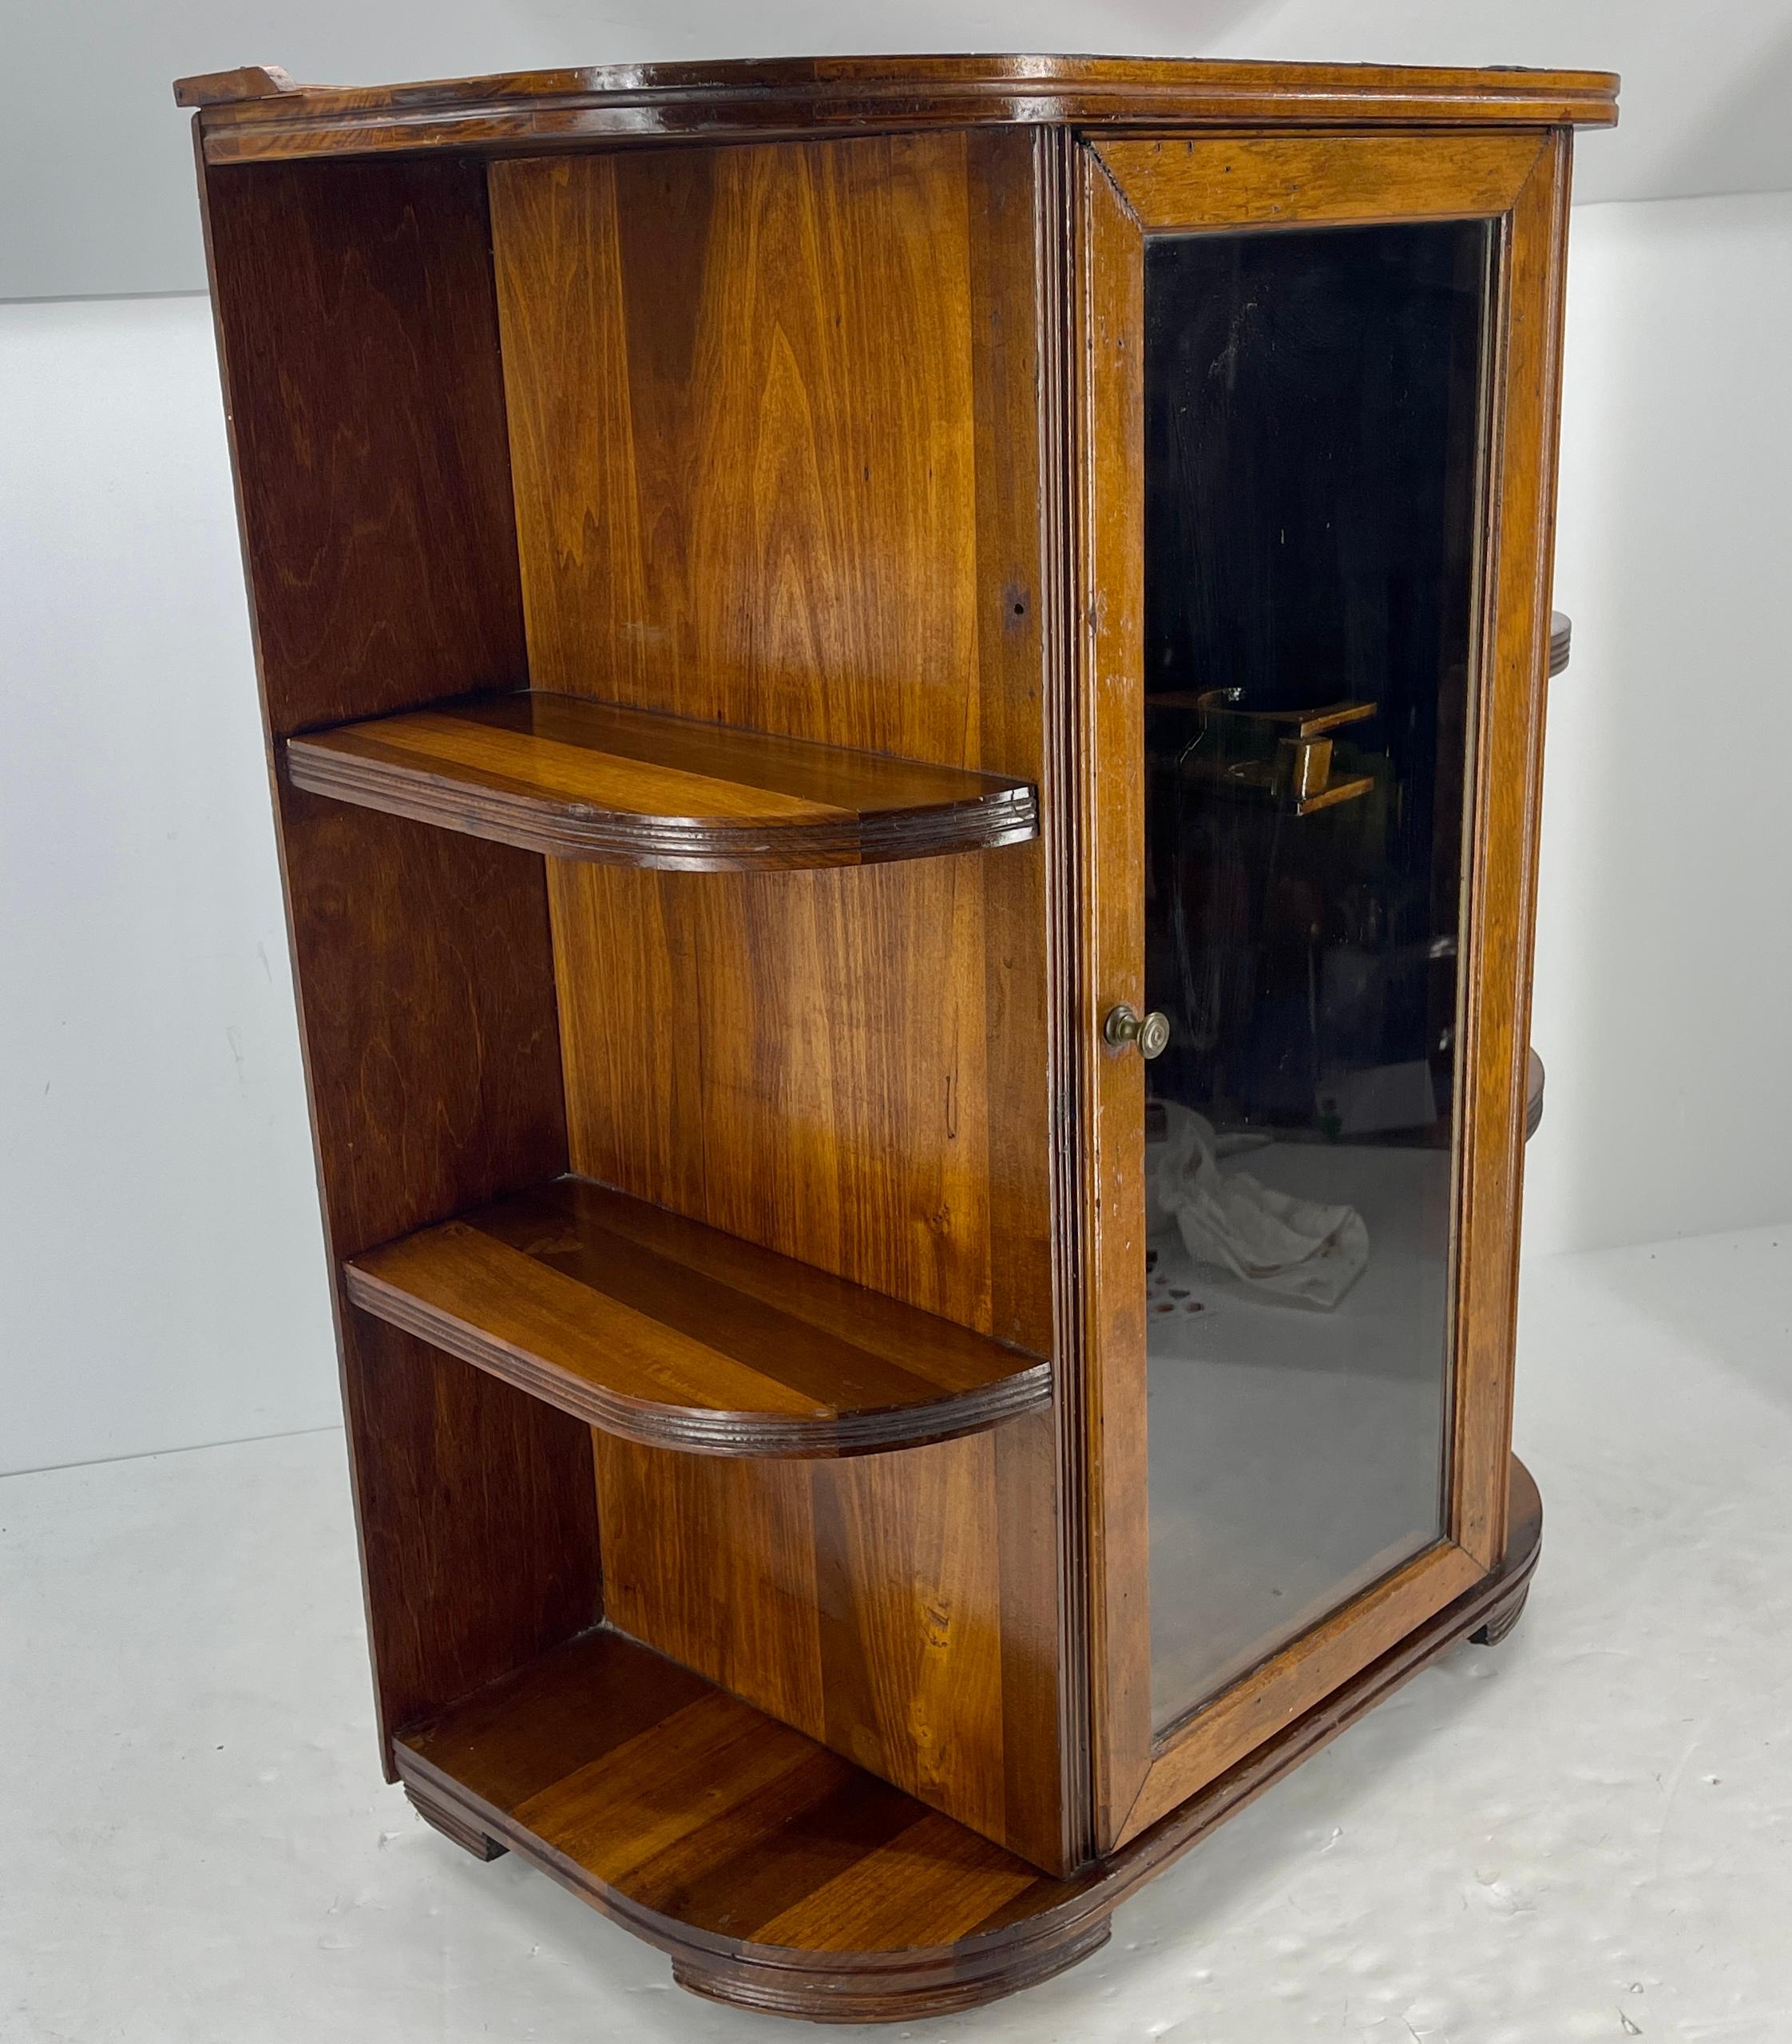 Hand-Crafted German Art Deco Dry Bar Cabinet on Caster Wheels